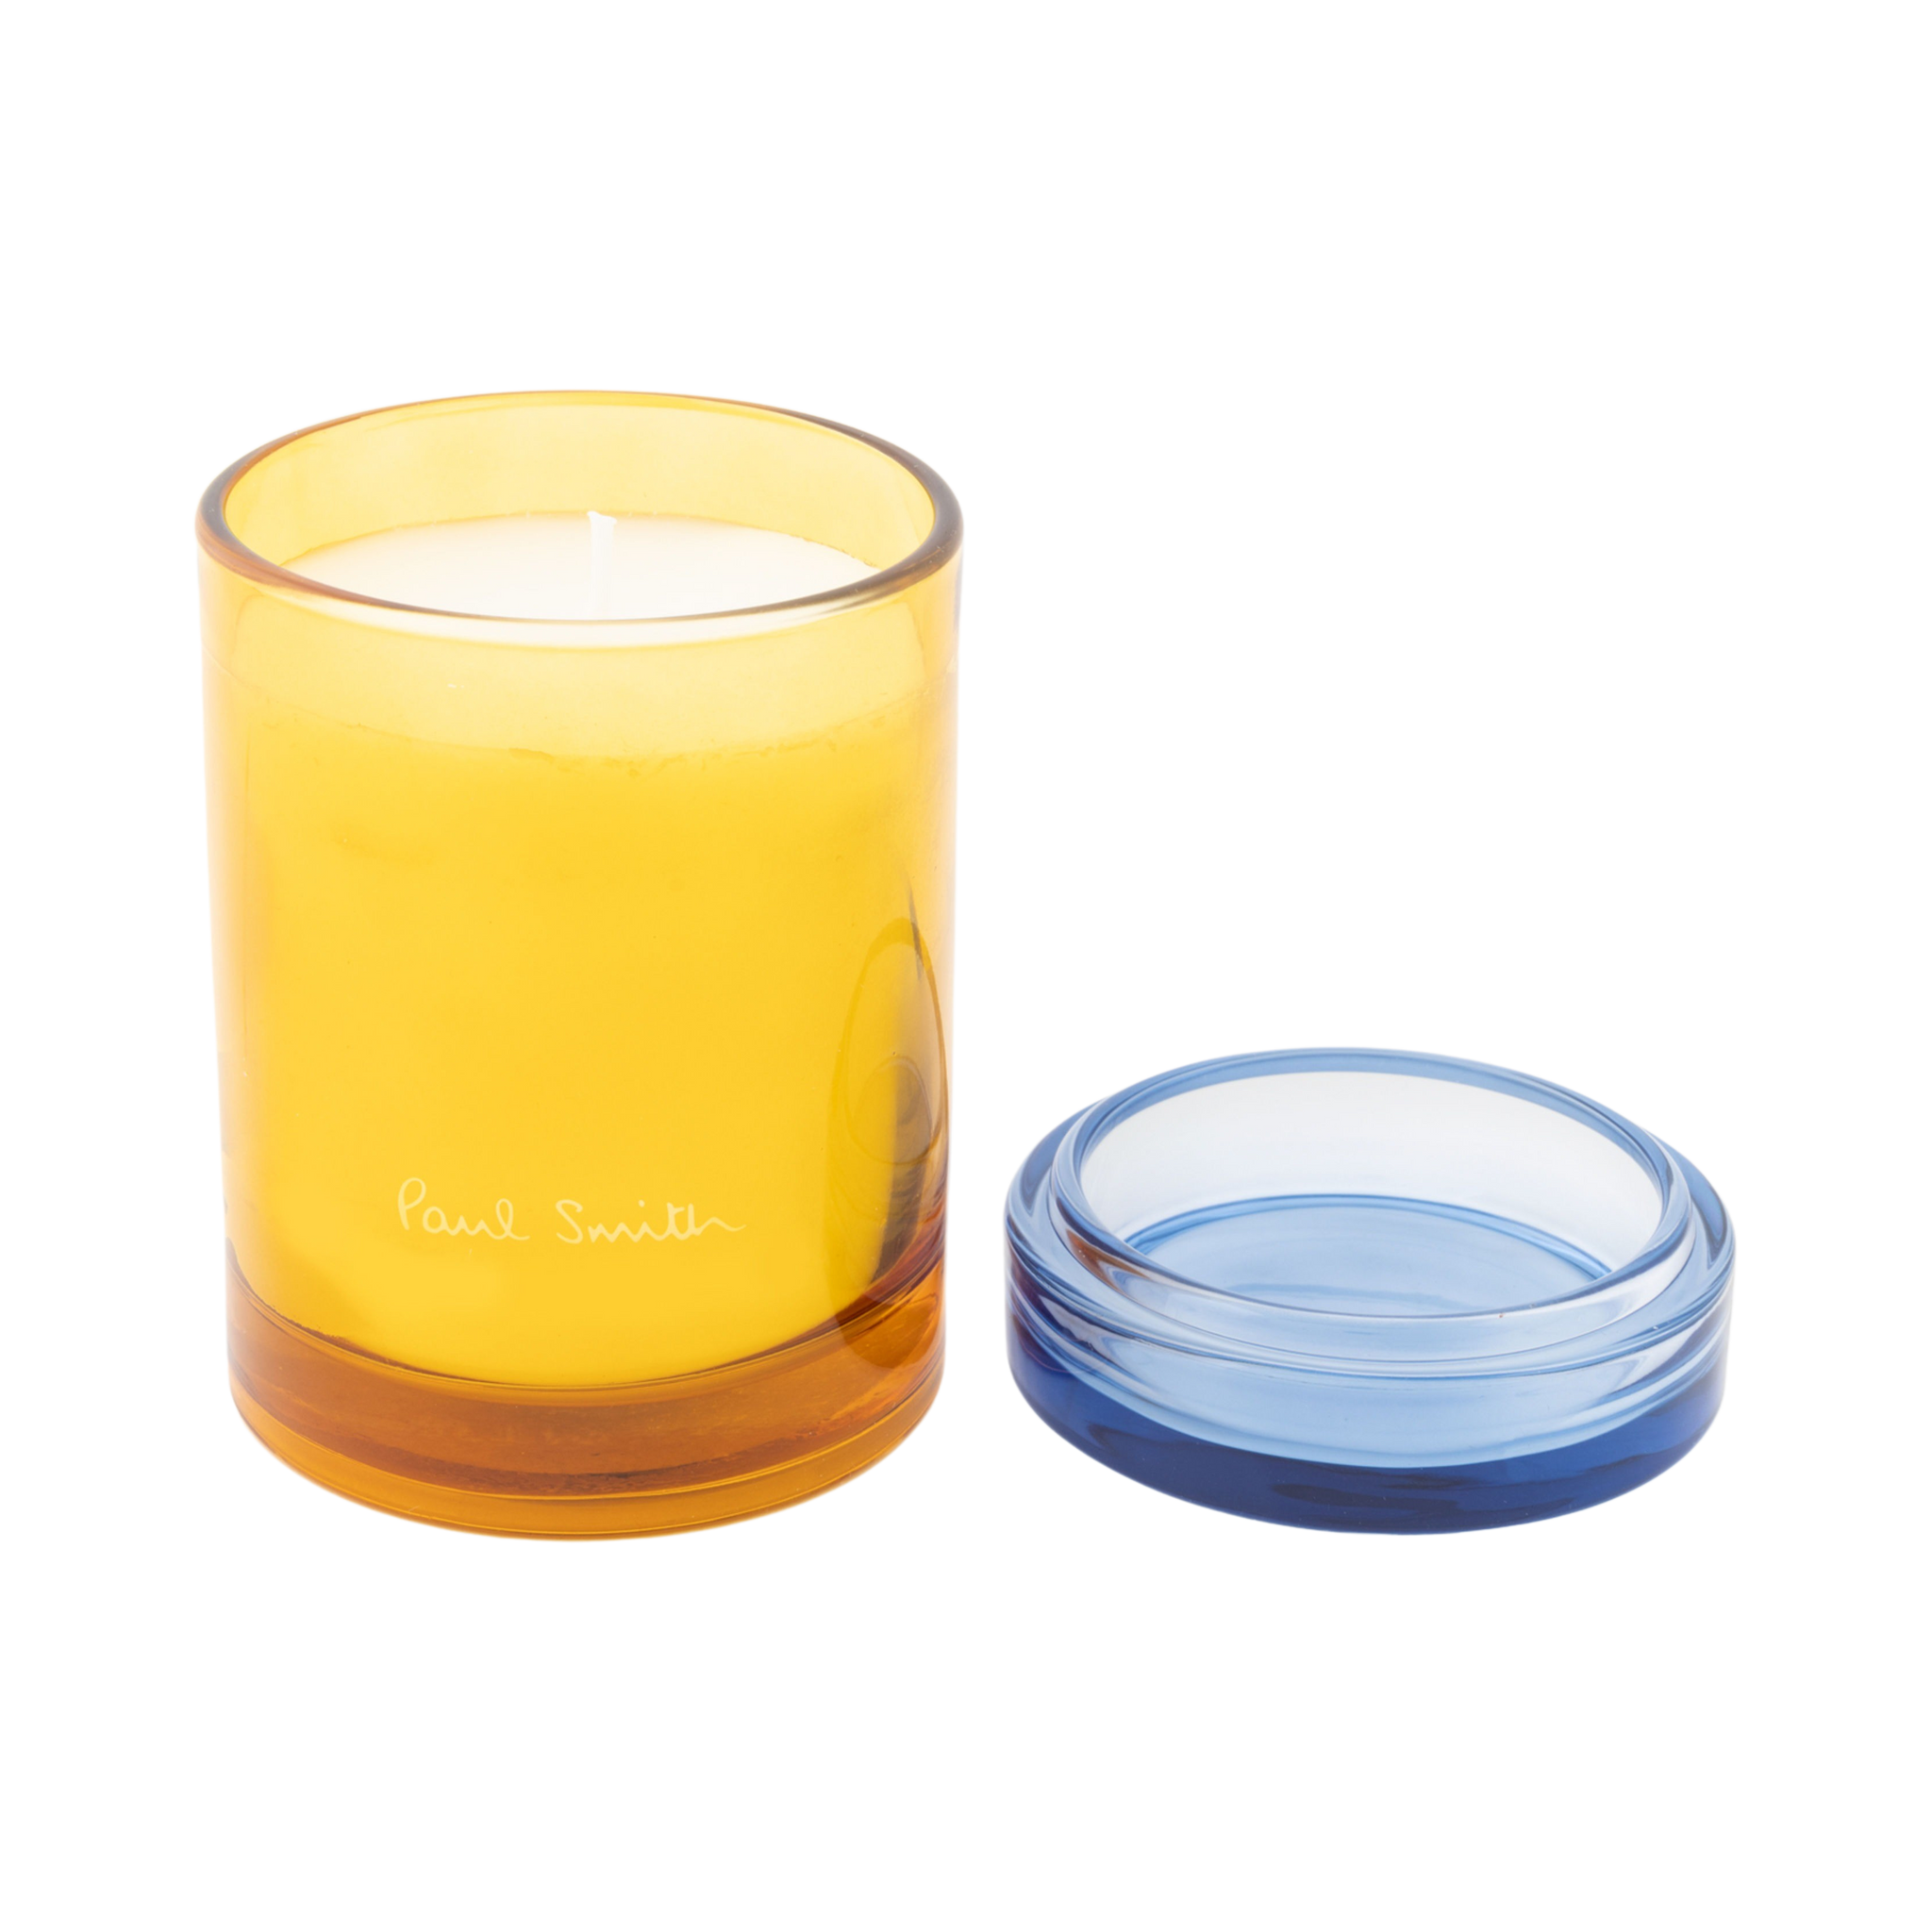 88572 Paul Smith DAYDREAMER Candle 240g